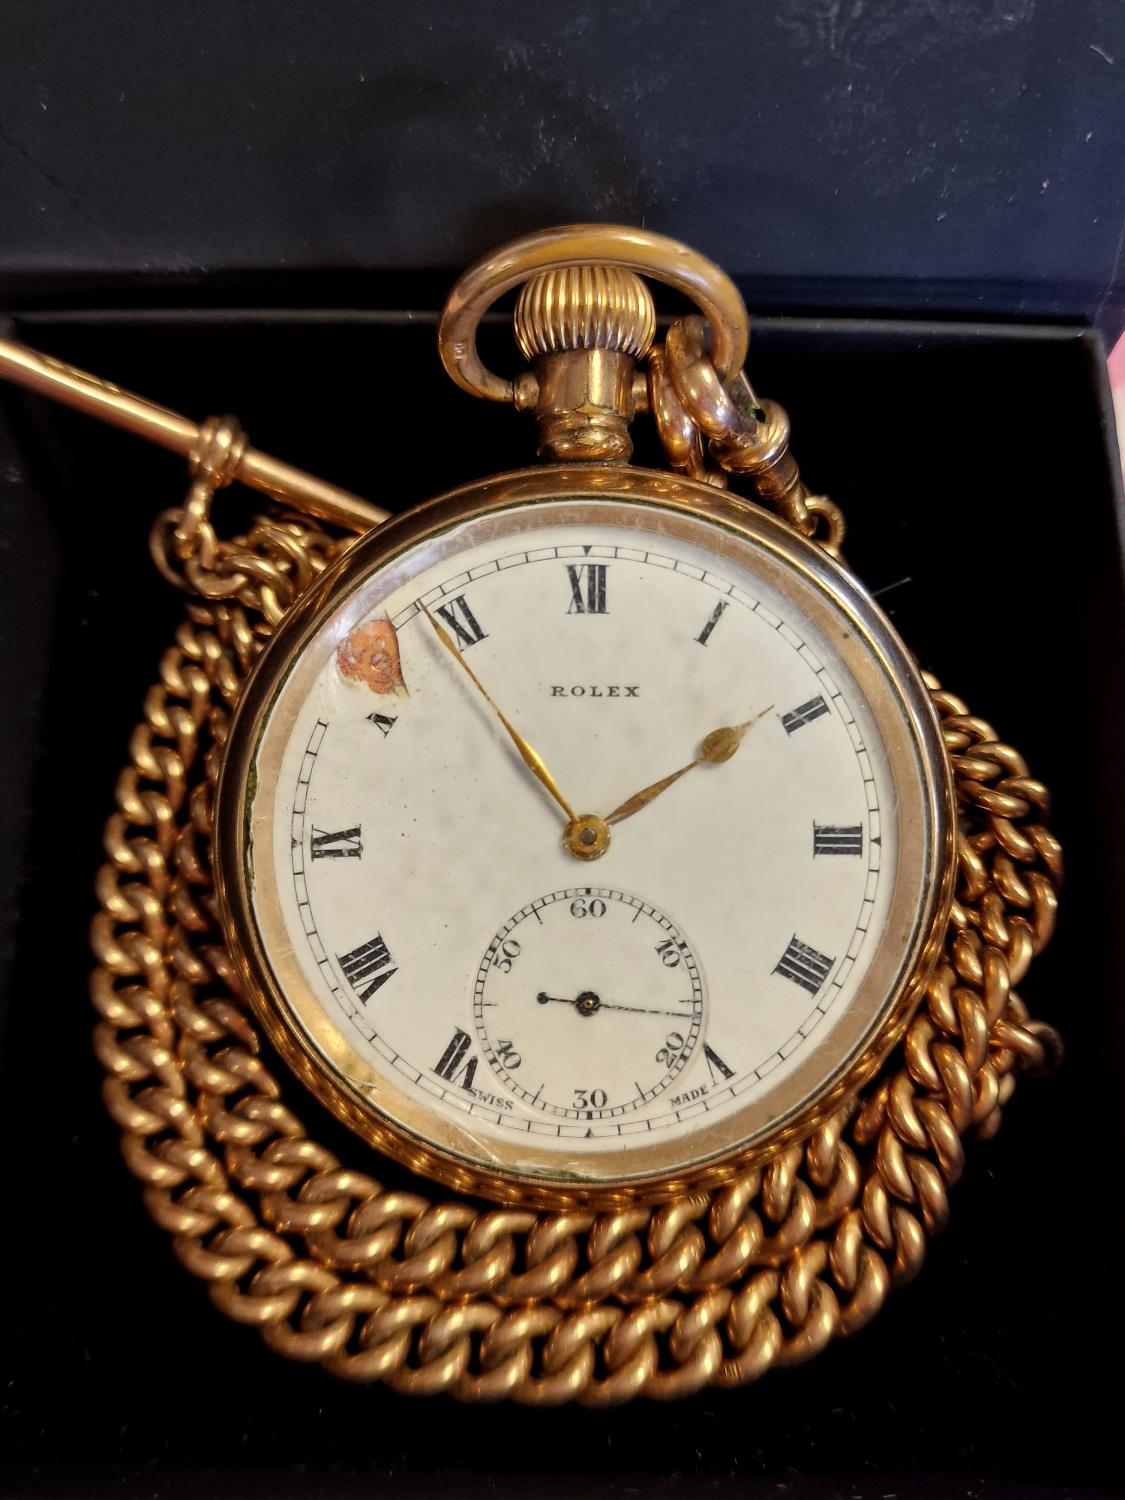 Rolex 1940's Gold-Plated Pocketwatch (104.5g) + a 9ct Gold Chain (45.8g)